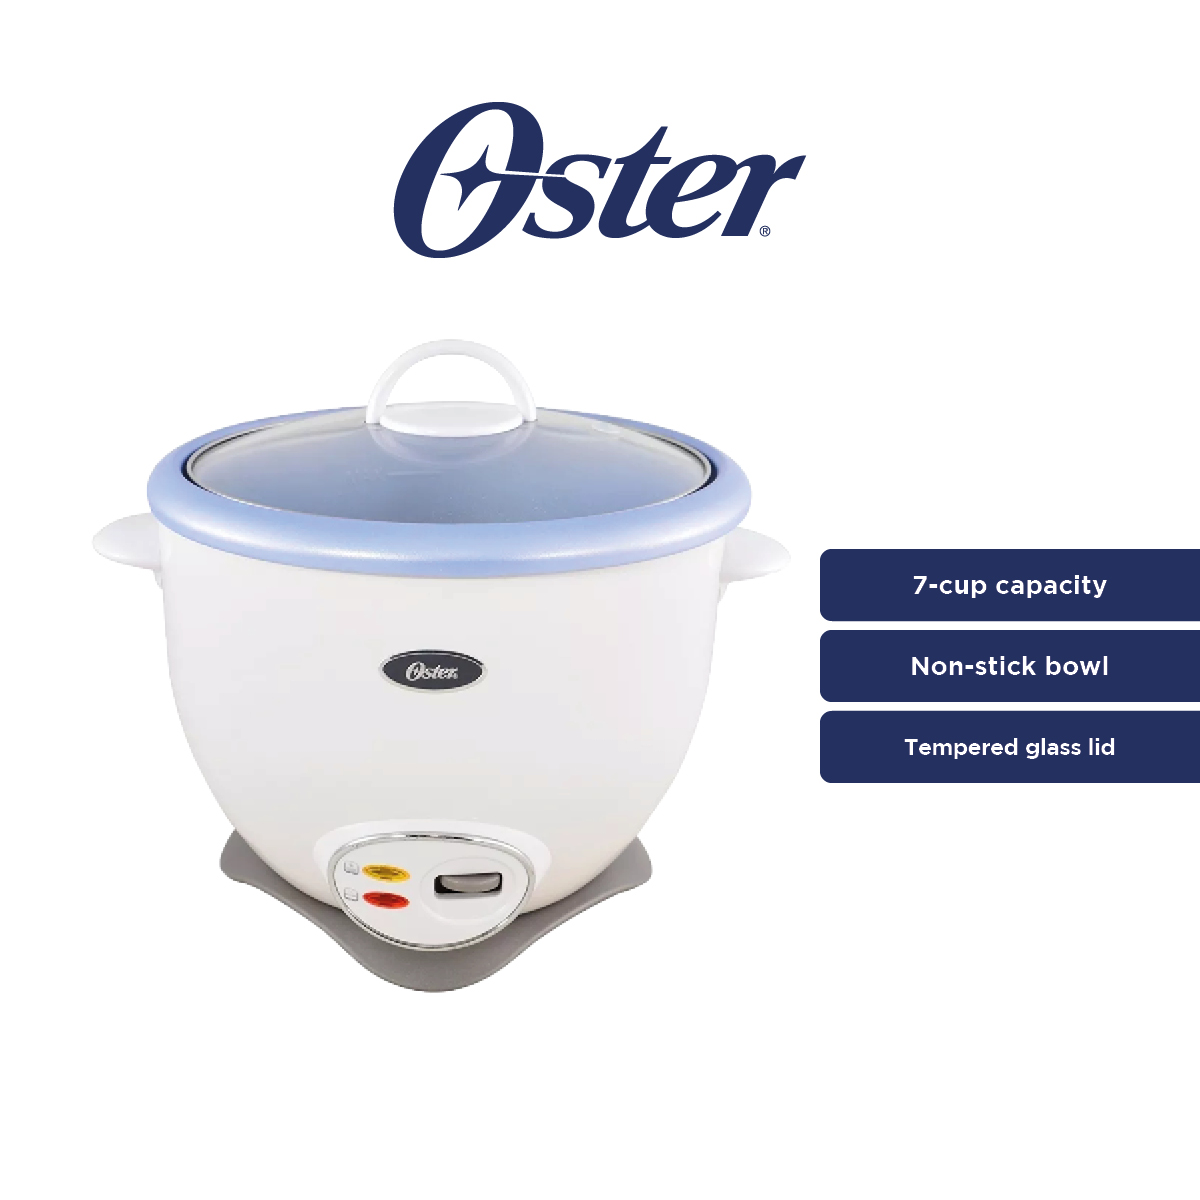 Oster White Rice Cookers